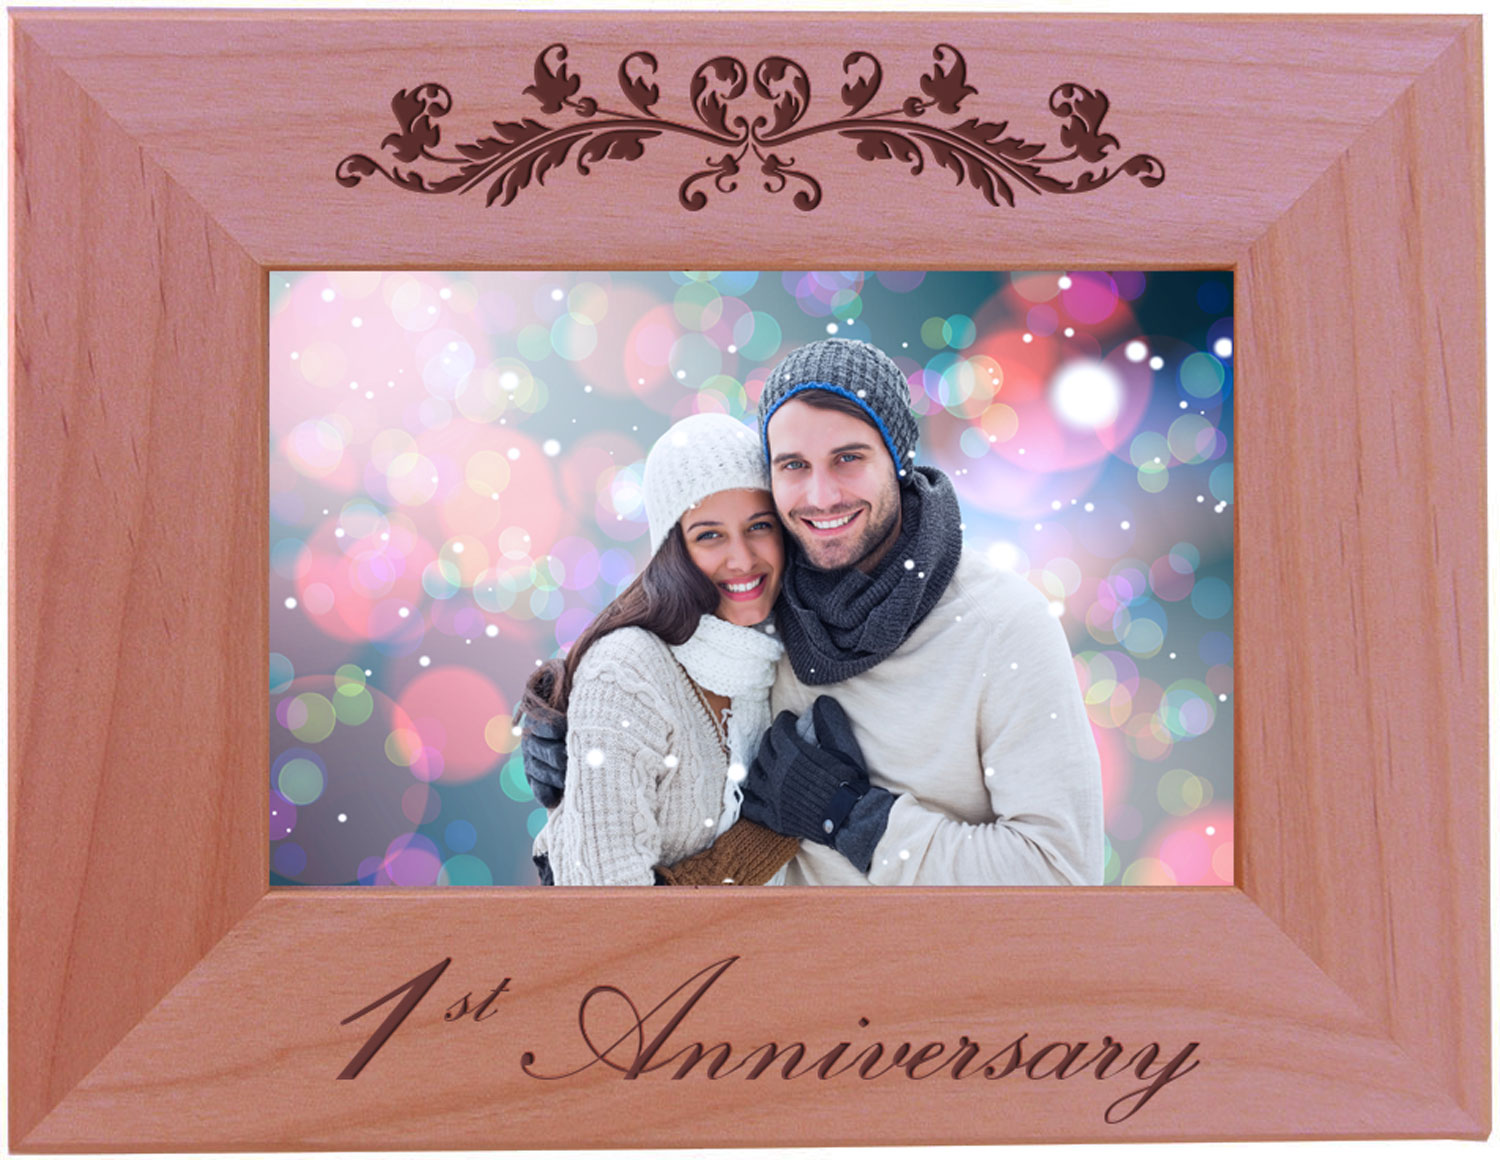 1st Anniversary - 4x6 Inch Engraved Alder Wood Picture Photo Frame - Great Anniversary gift for friends, parents and family - image 1 of 3